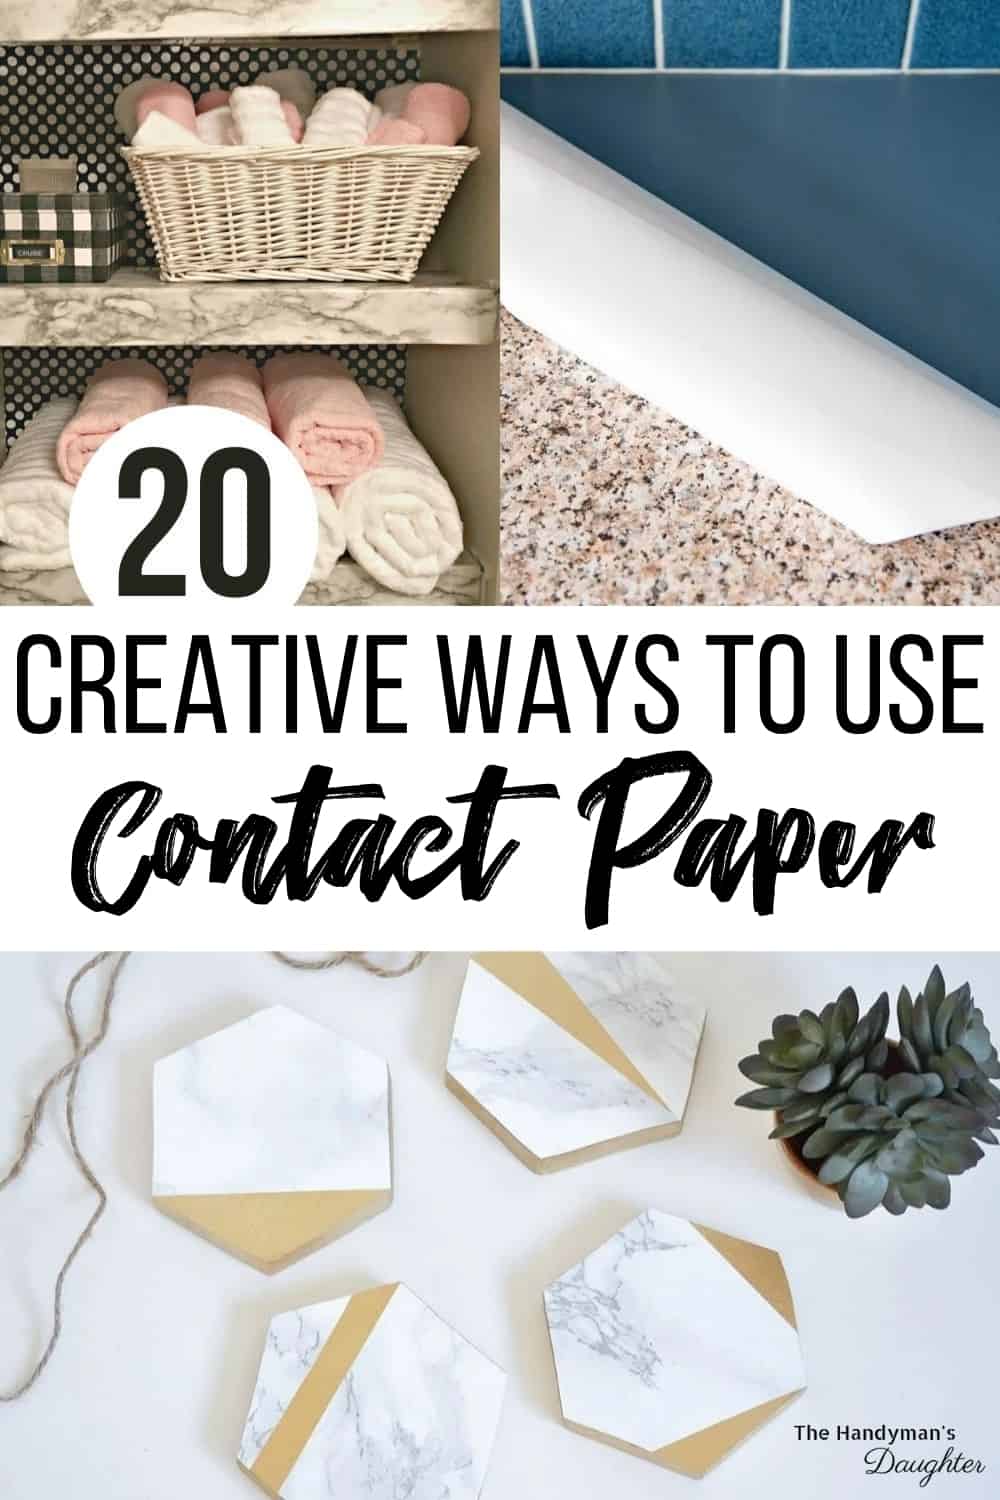 11 Clever Contact Paper Uses - How to Re-Do Furniture & More With